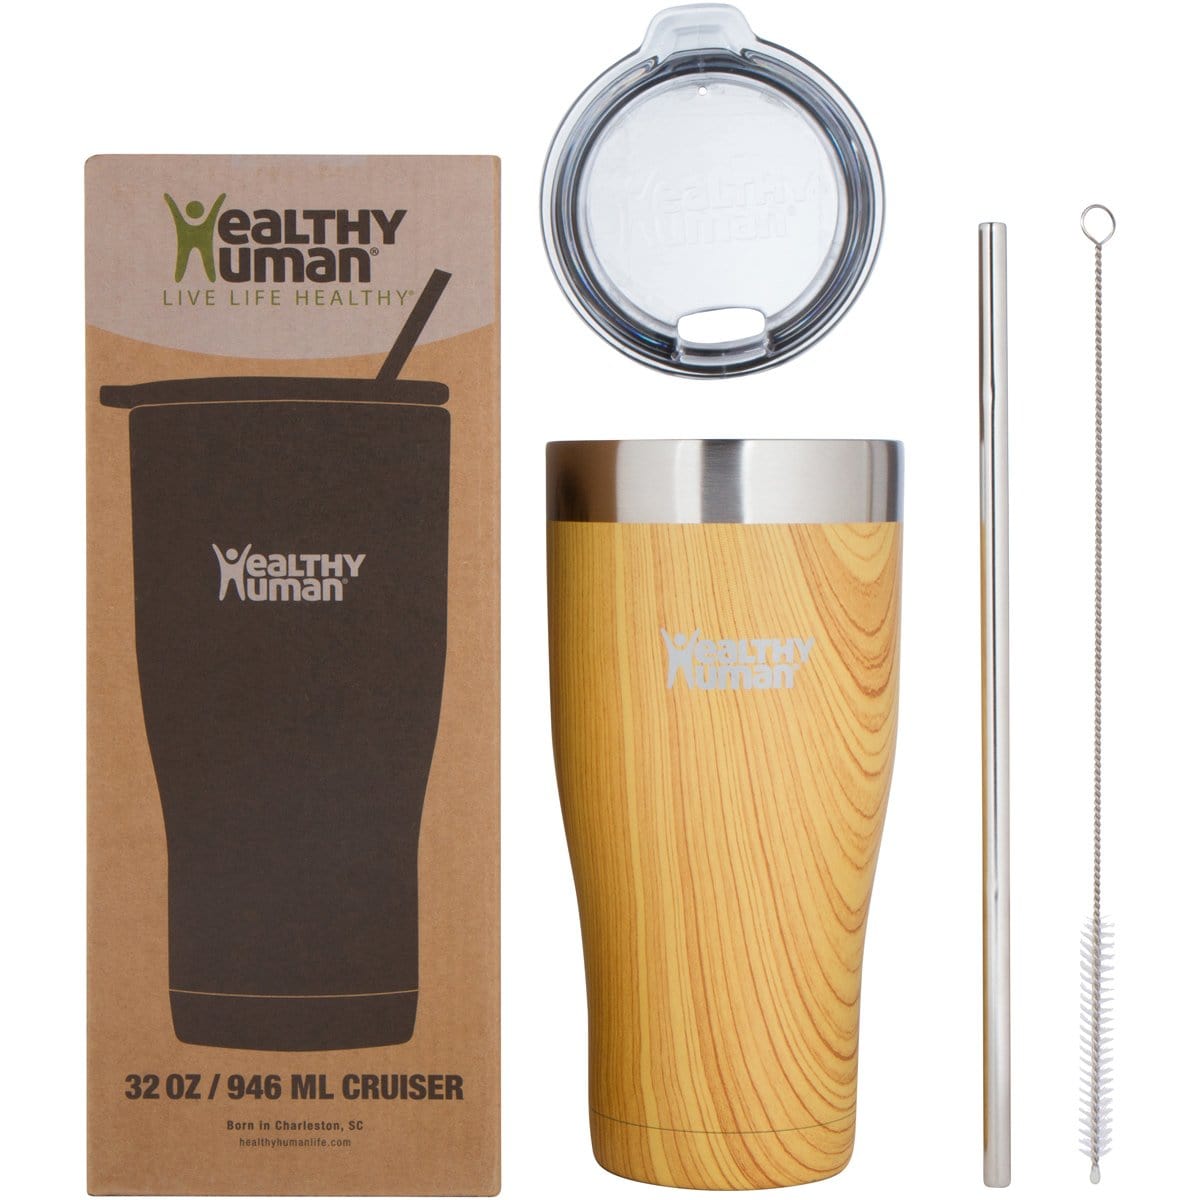 Why You Absolutely Need A 32 Oz Tumbler With Straw - HydroJug